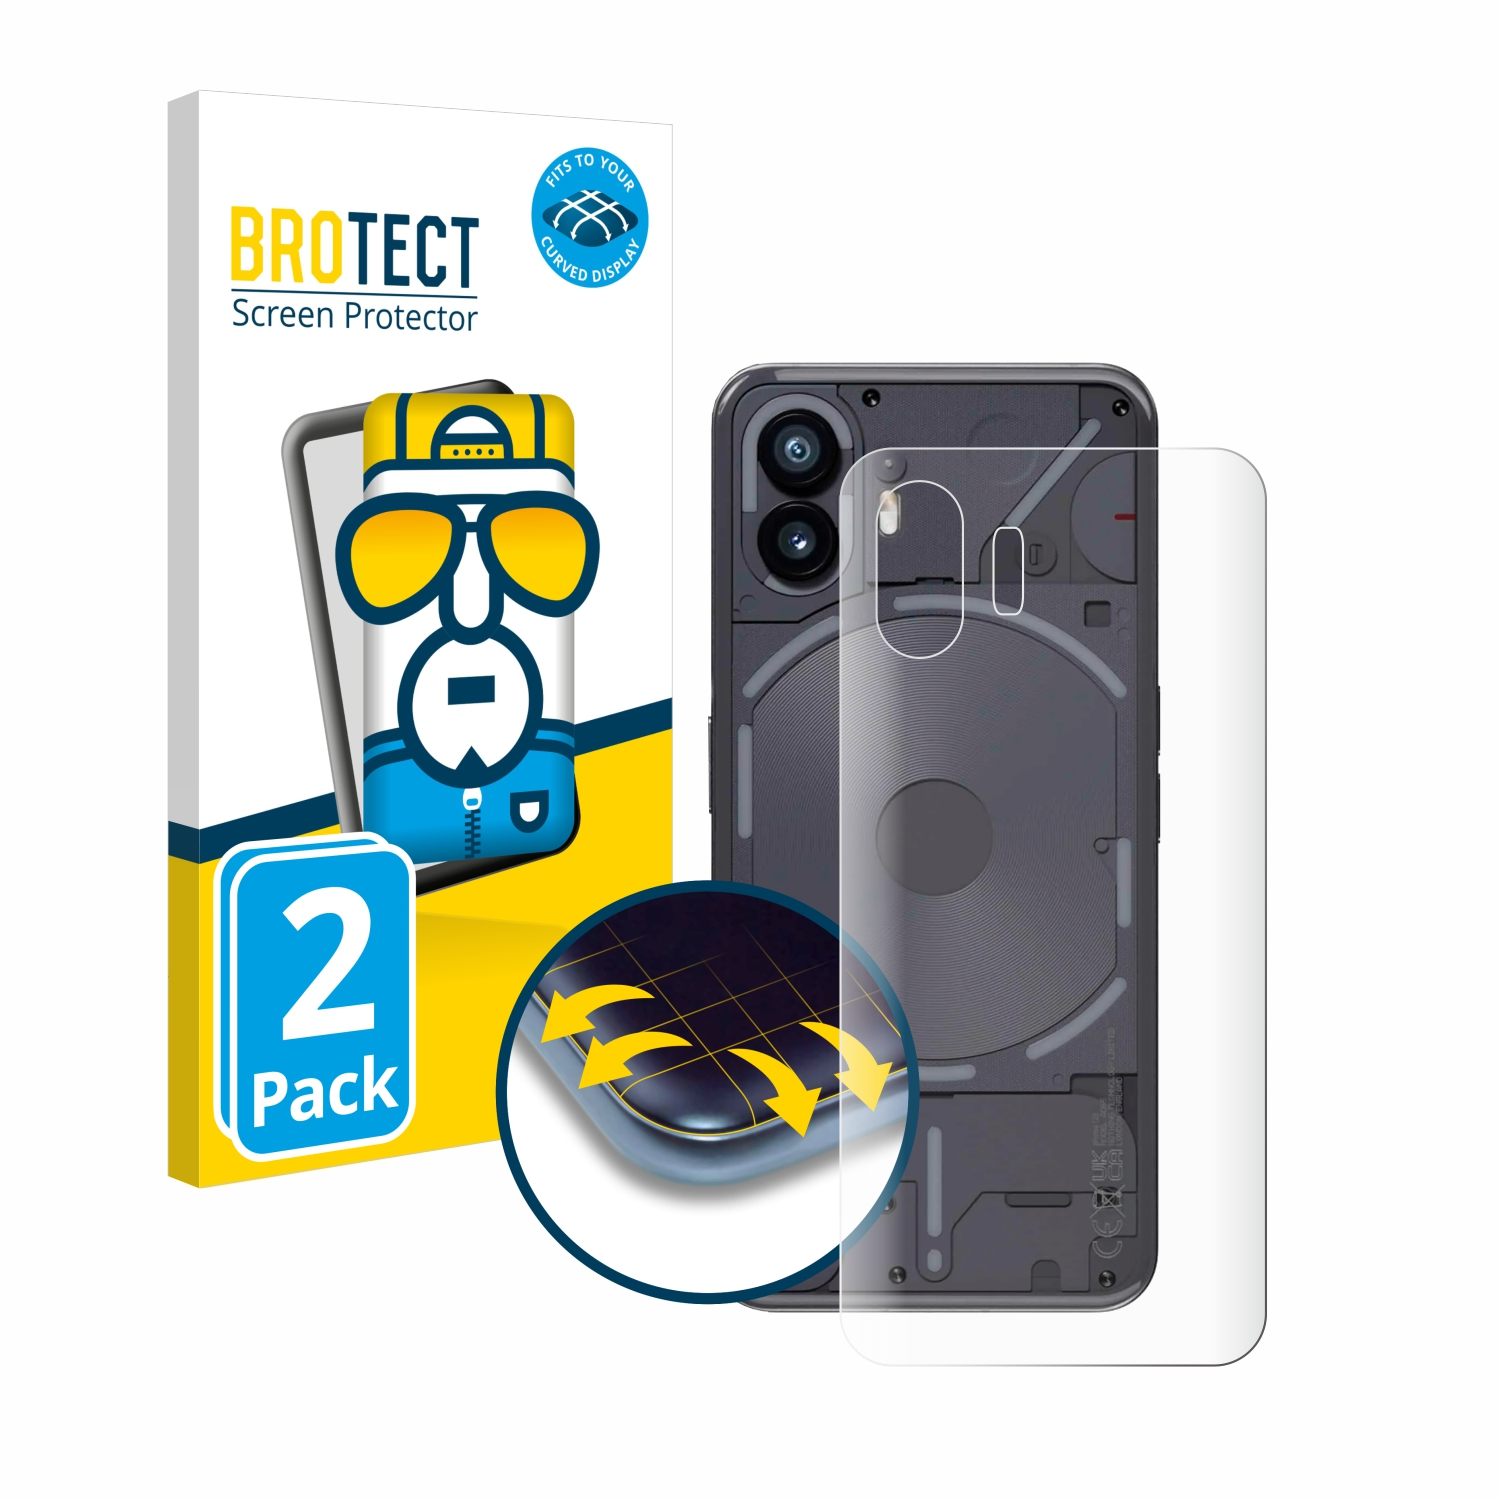 Phone Flex BROTECT Full-Cover (2)) Schutzfolie(für Nothing 2x Curved 3D